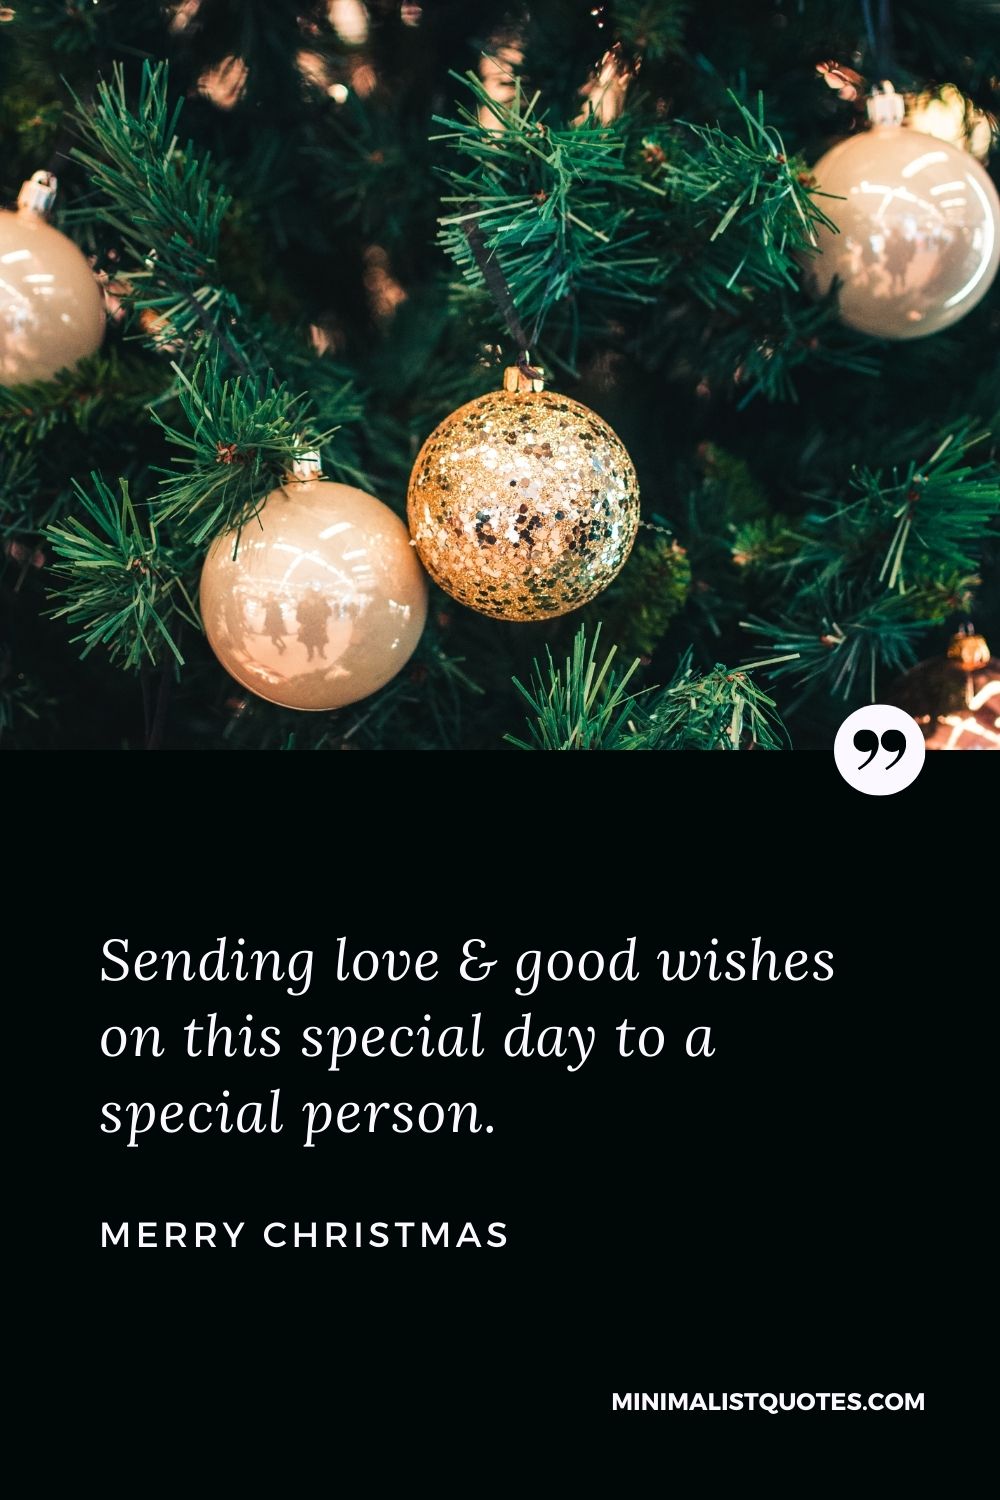 Merry Christmas Wish - Sending love & good wishes on this special day to a special person.